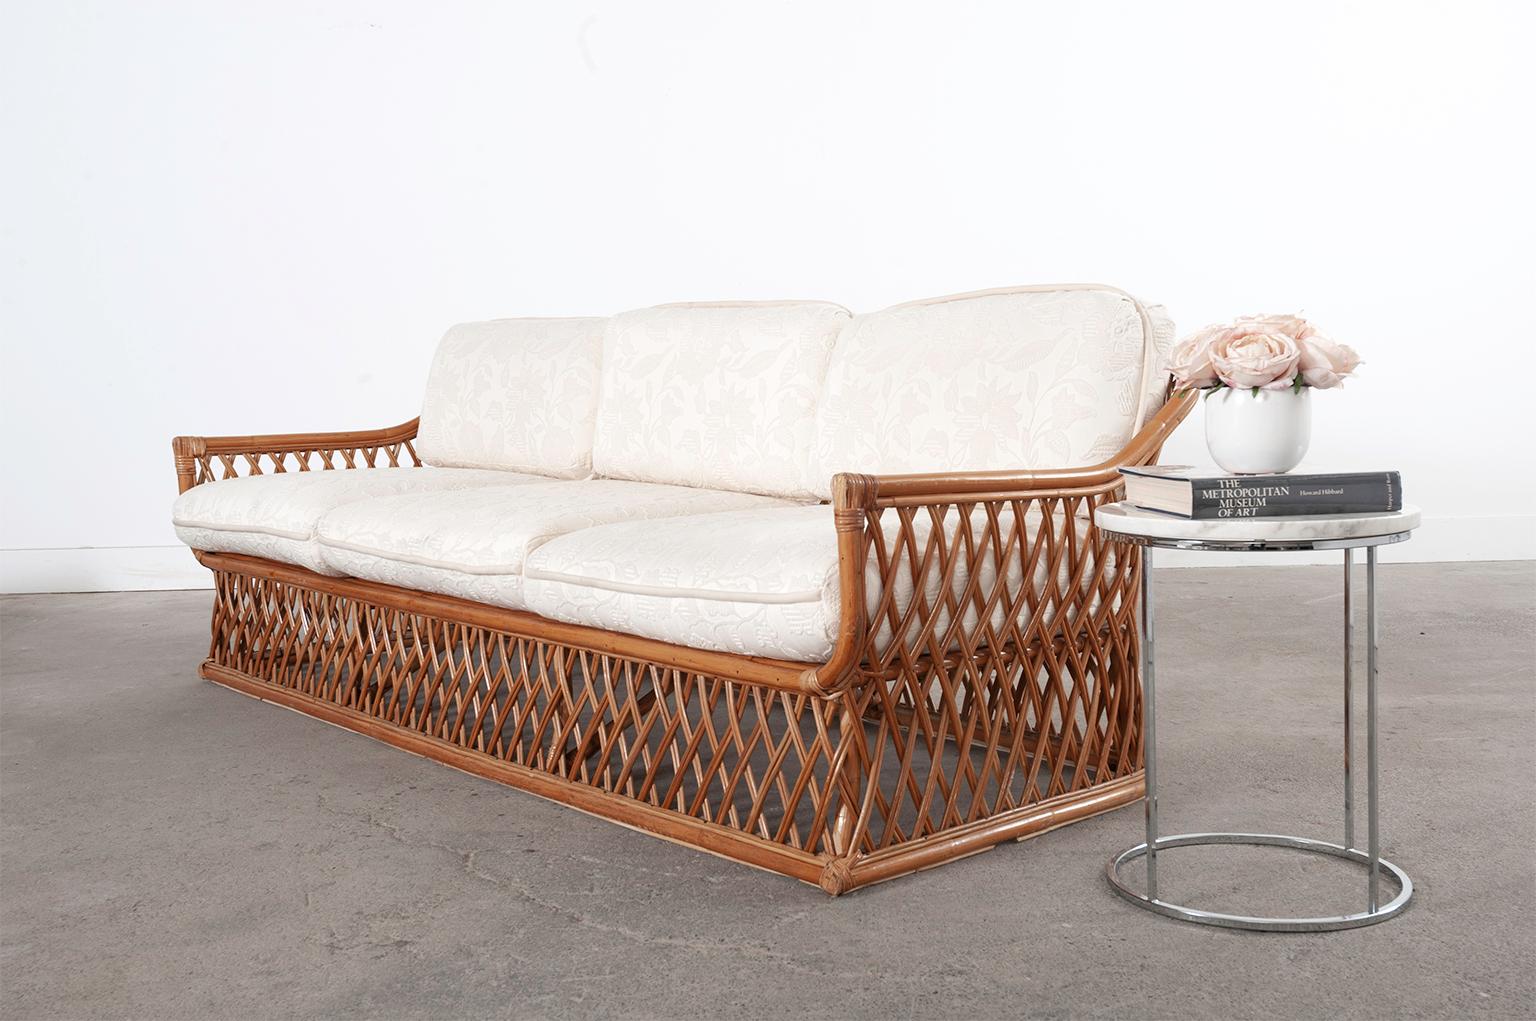 Grand Mid-Century Modern Italian bamboo rattan sofa made in the style and manner of Vivai Del Sud. The organic modern sofa is hand-crafted from bamboo and rattan. The bamboo frame features a geometric lattice woven design on the front, back, and